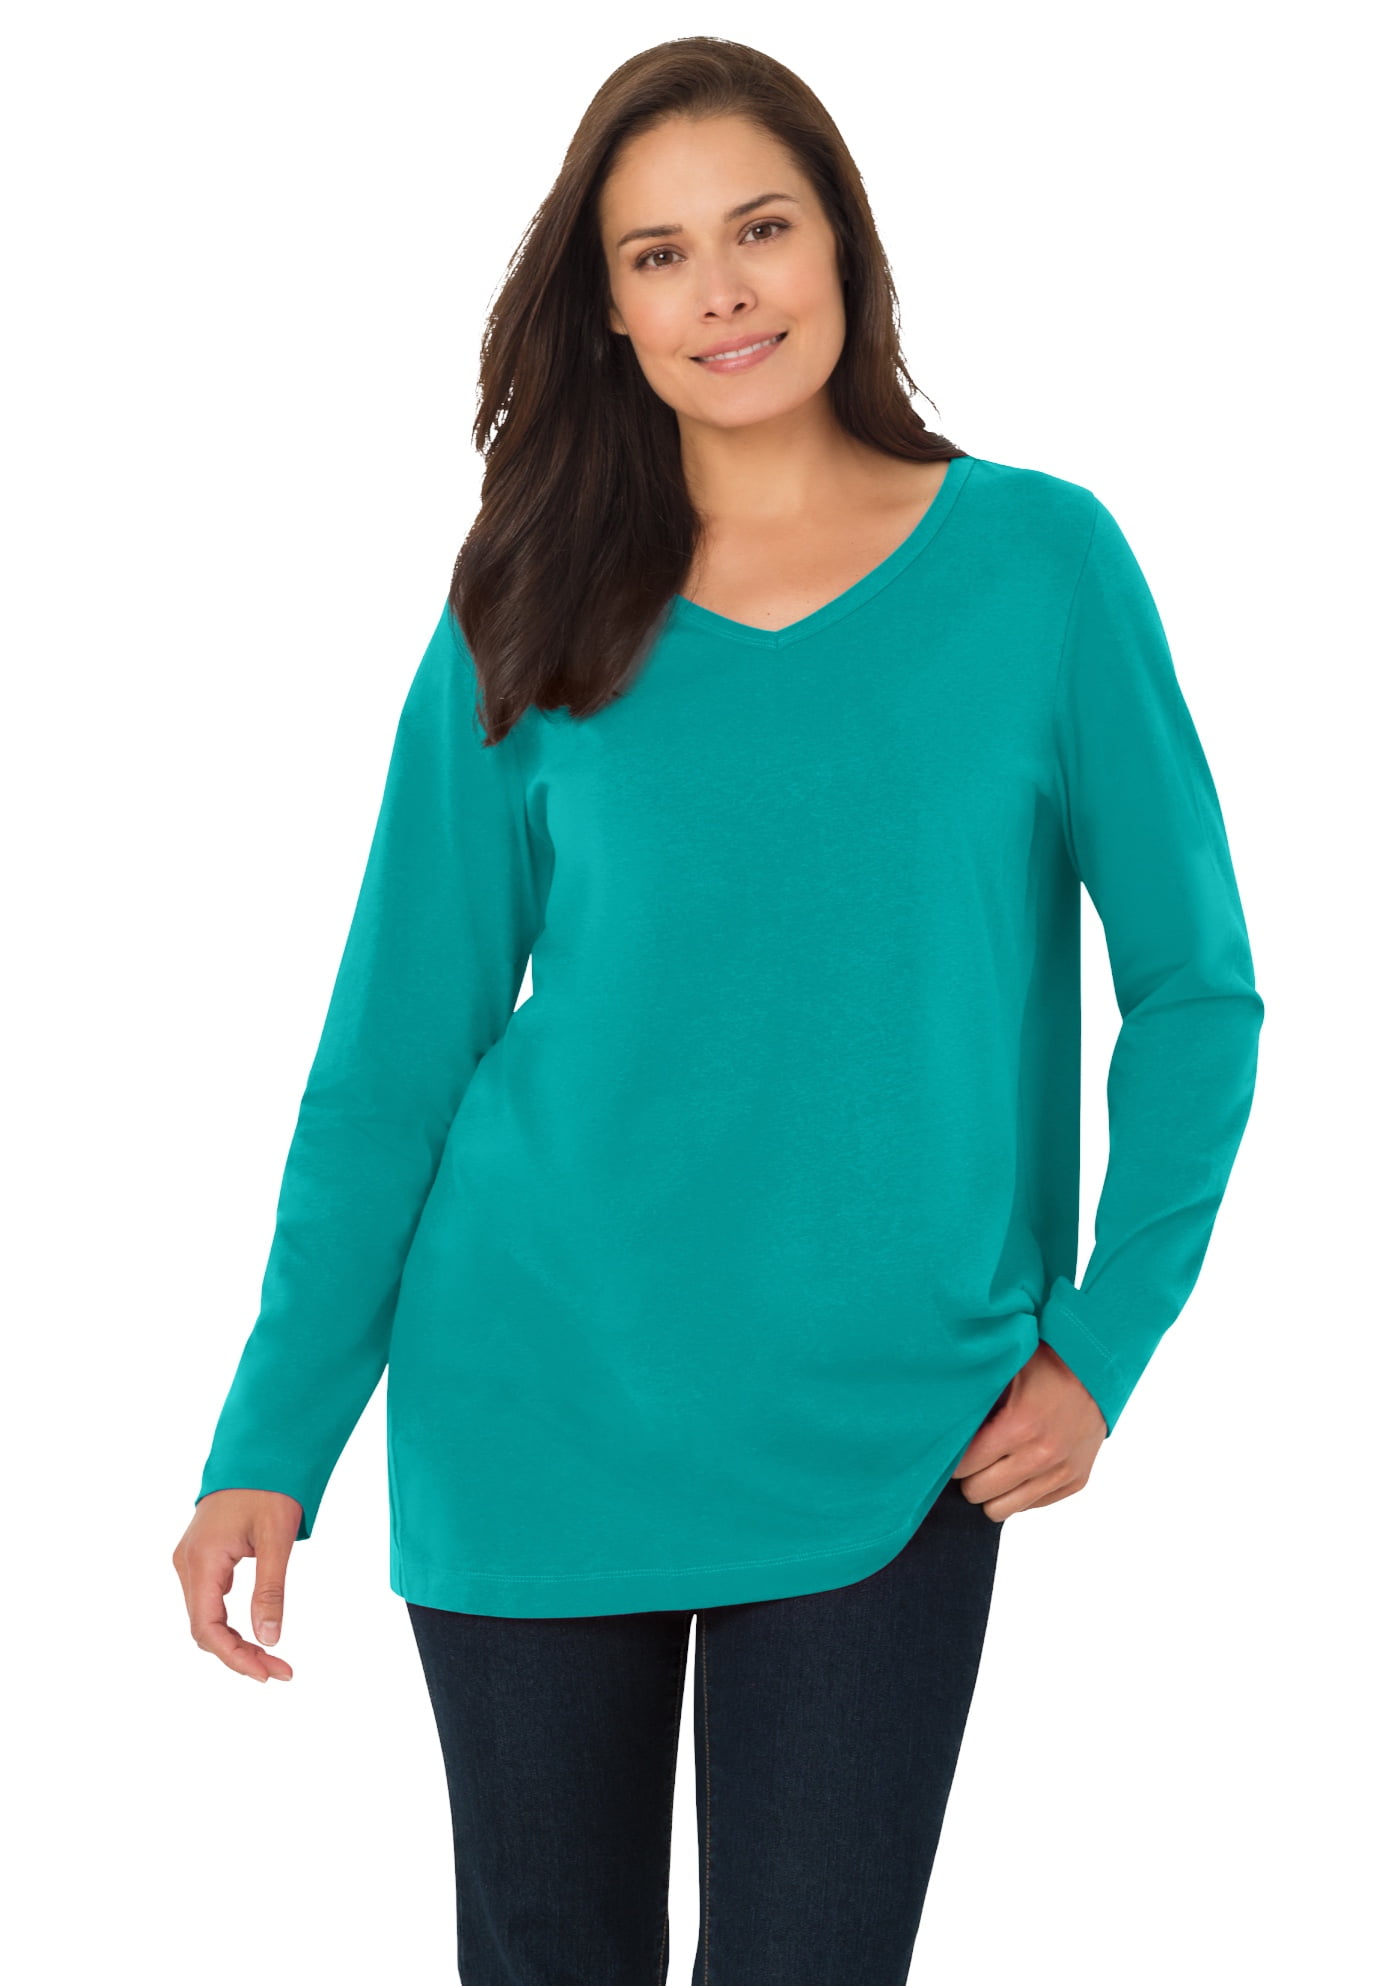 Woman Within - Woman Within Women's Plus Size Perfect Long-Sleeve V ...